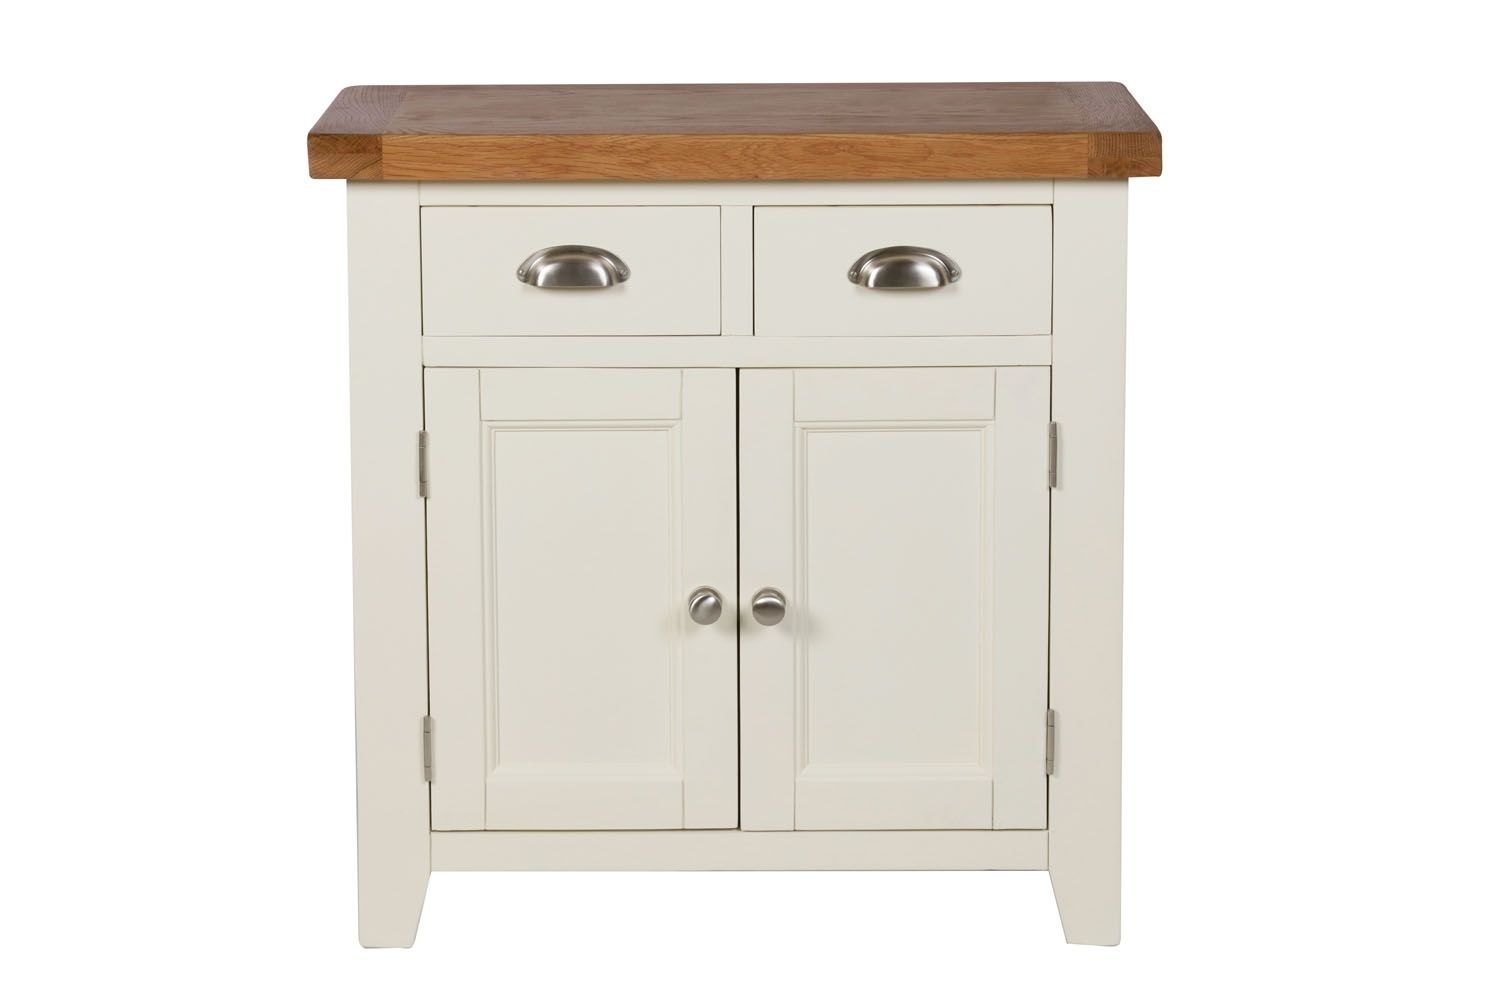 Small Cream Painted Oak Sideboard | 80cm Country Cottage | Free Intended For Recent Lockwood Sideboards (View 6 of 20)